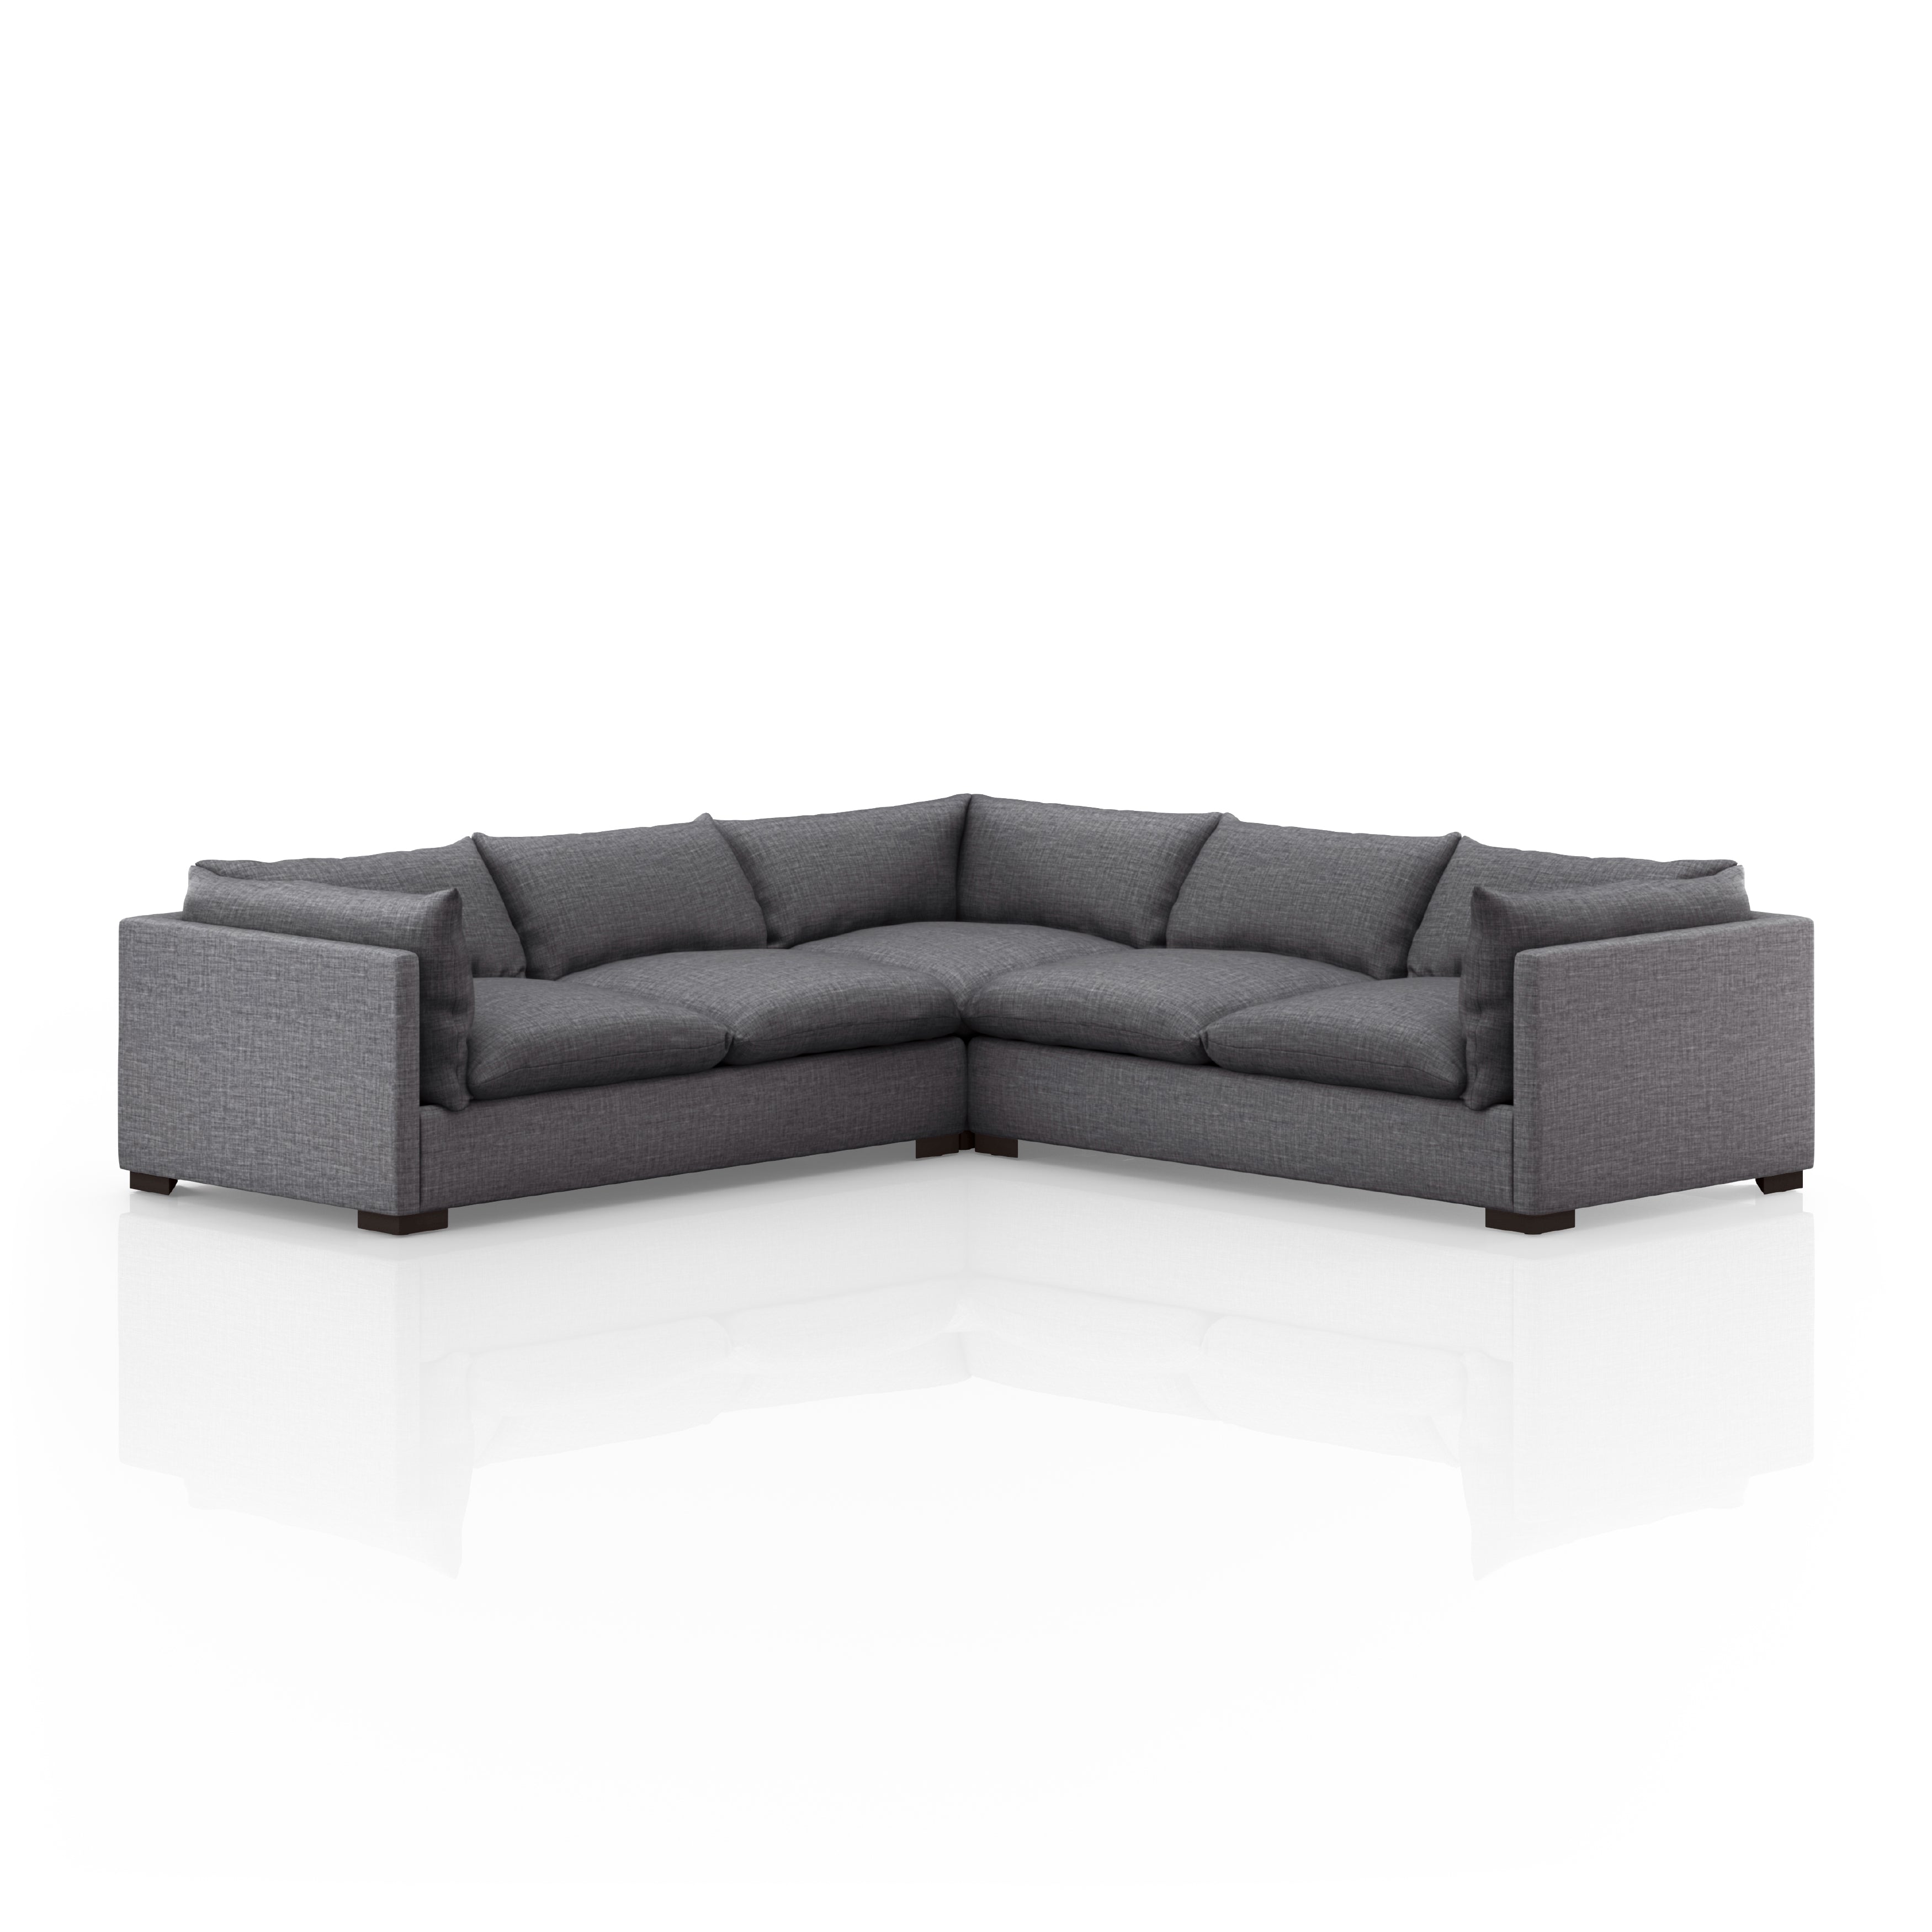 Westwood Bennett Charcoal 3-PC Sectional's clean-lined and simply styled, high-performance fabric places a family-friendly twist on the quintessential sectional. A wooden base keeps things classy while casual. Various configuration options offer flexibility in any size space. Amethyst Home provides interior design services, furniture, rugs, and lighting in the  Miami metro area.